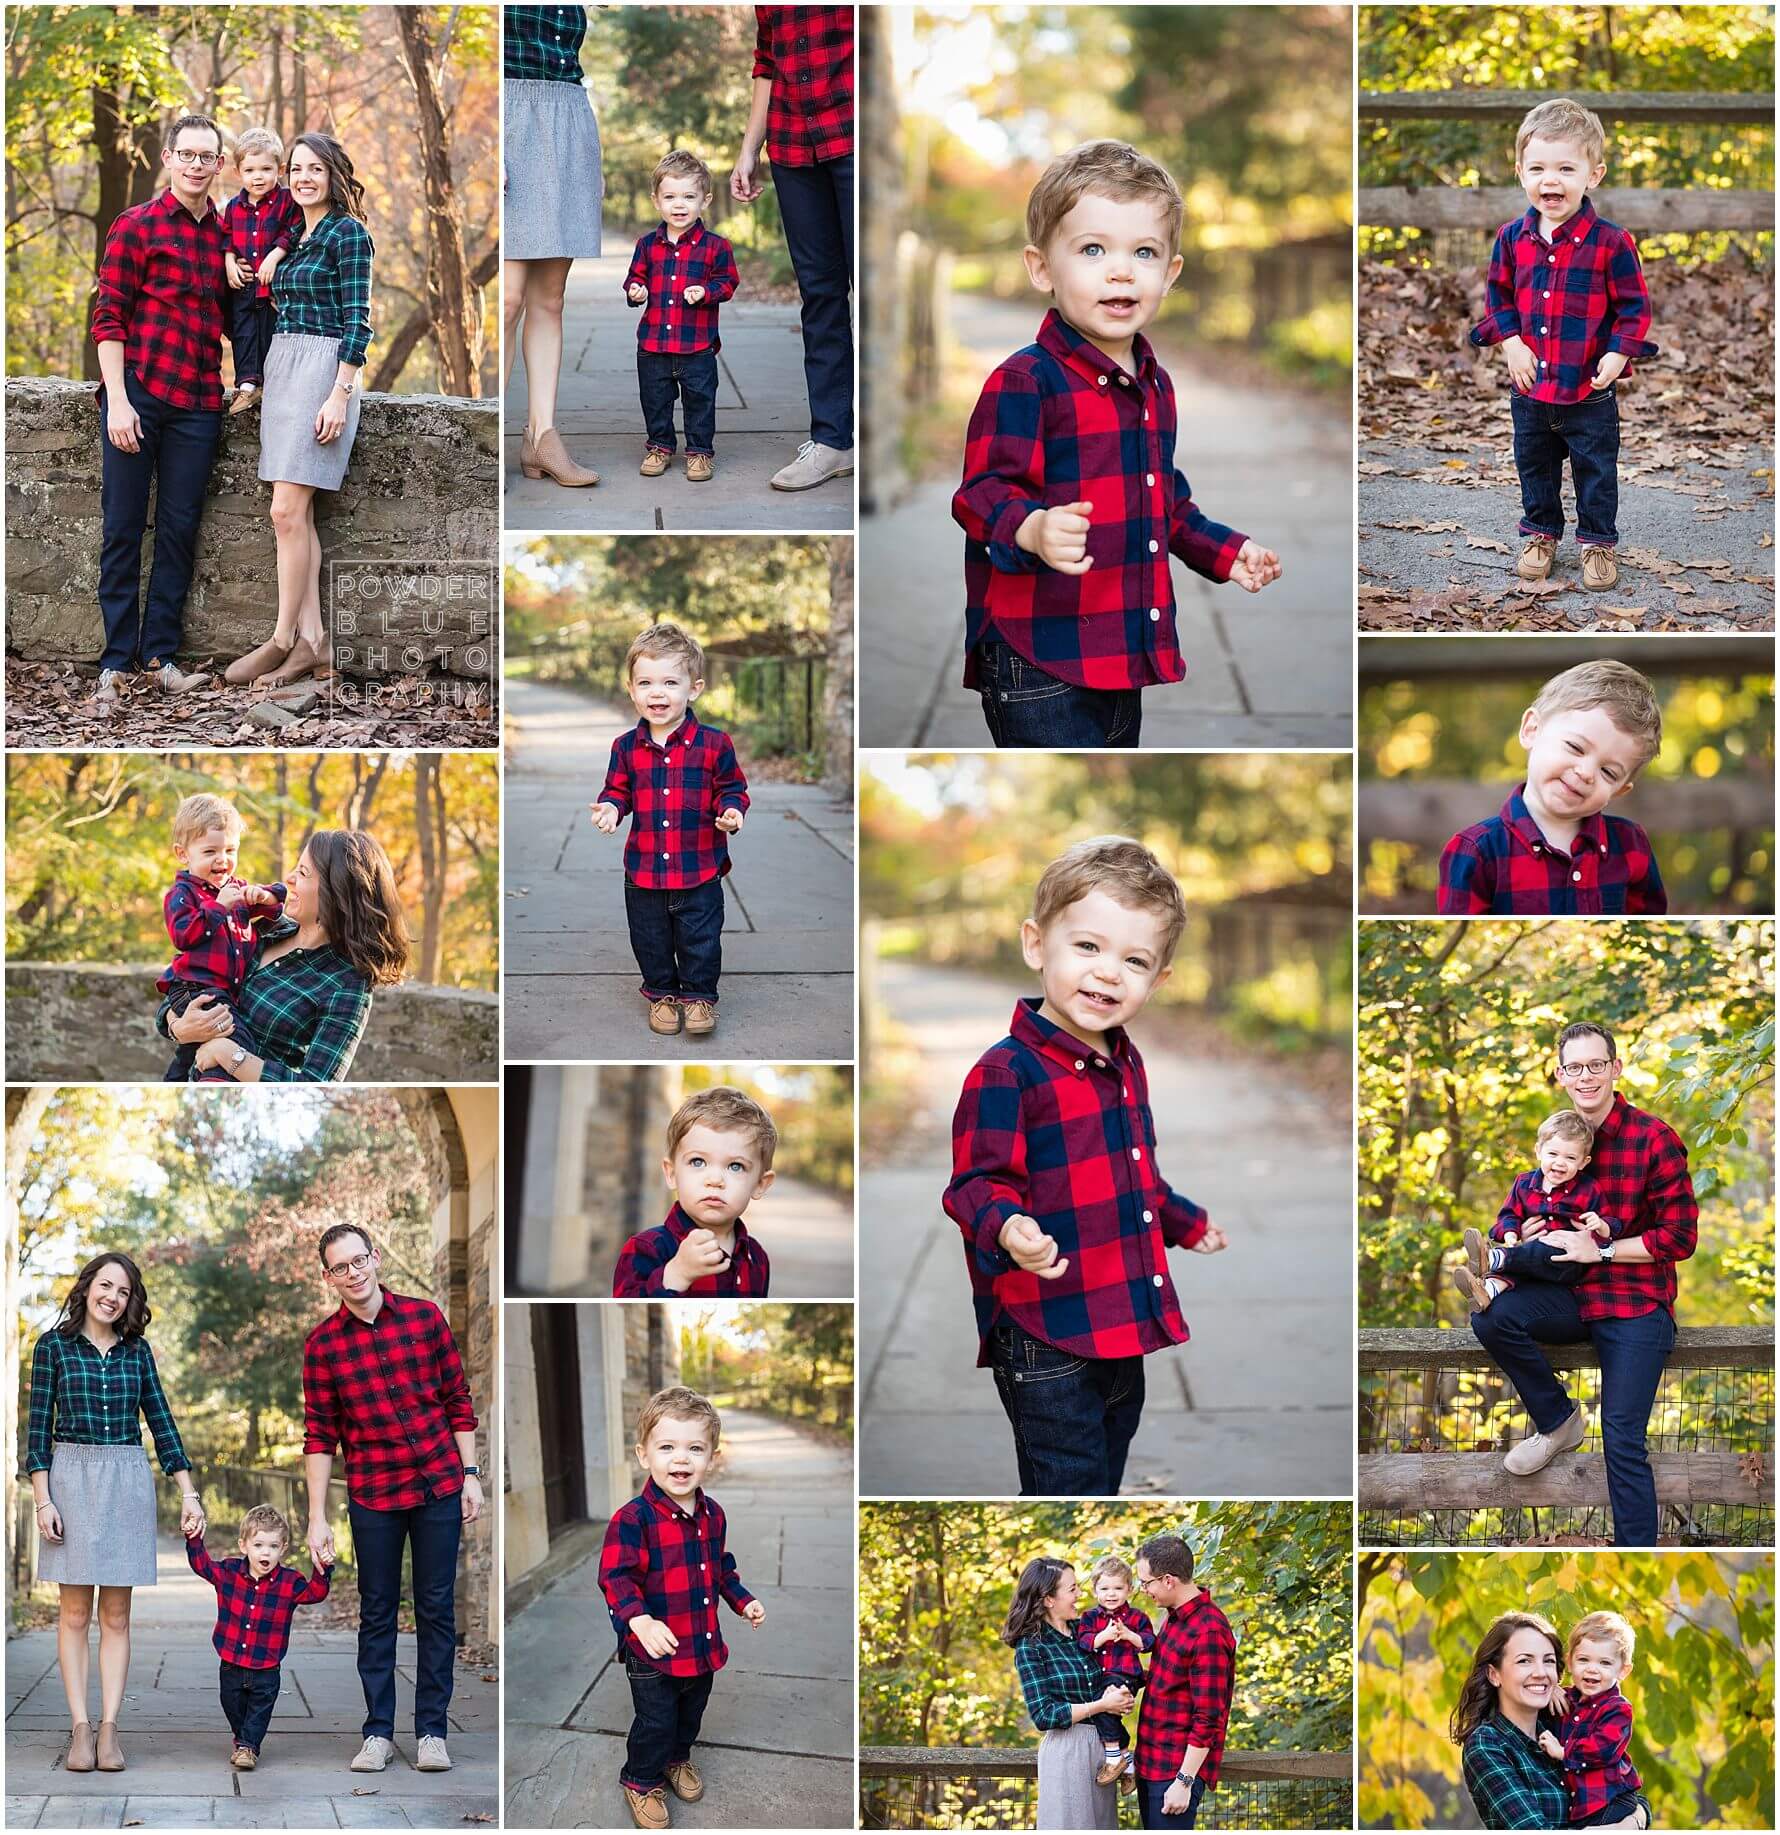 pittsburgh family photographer fall mini sessions in pittsburgh, pa at frick park with green and yellow fall leaves